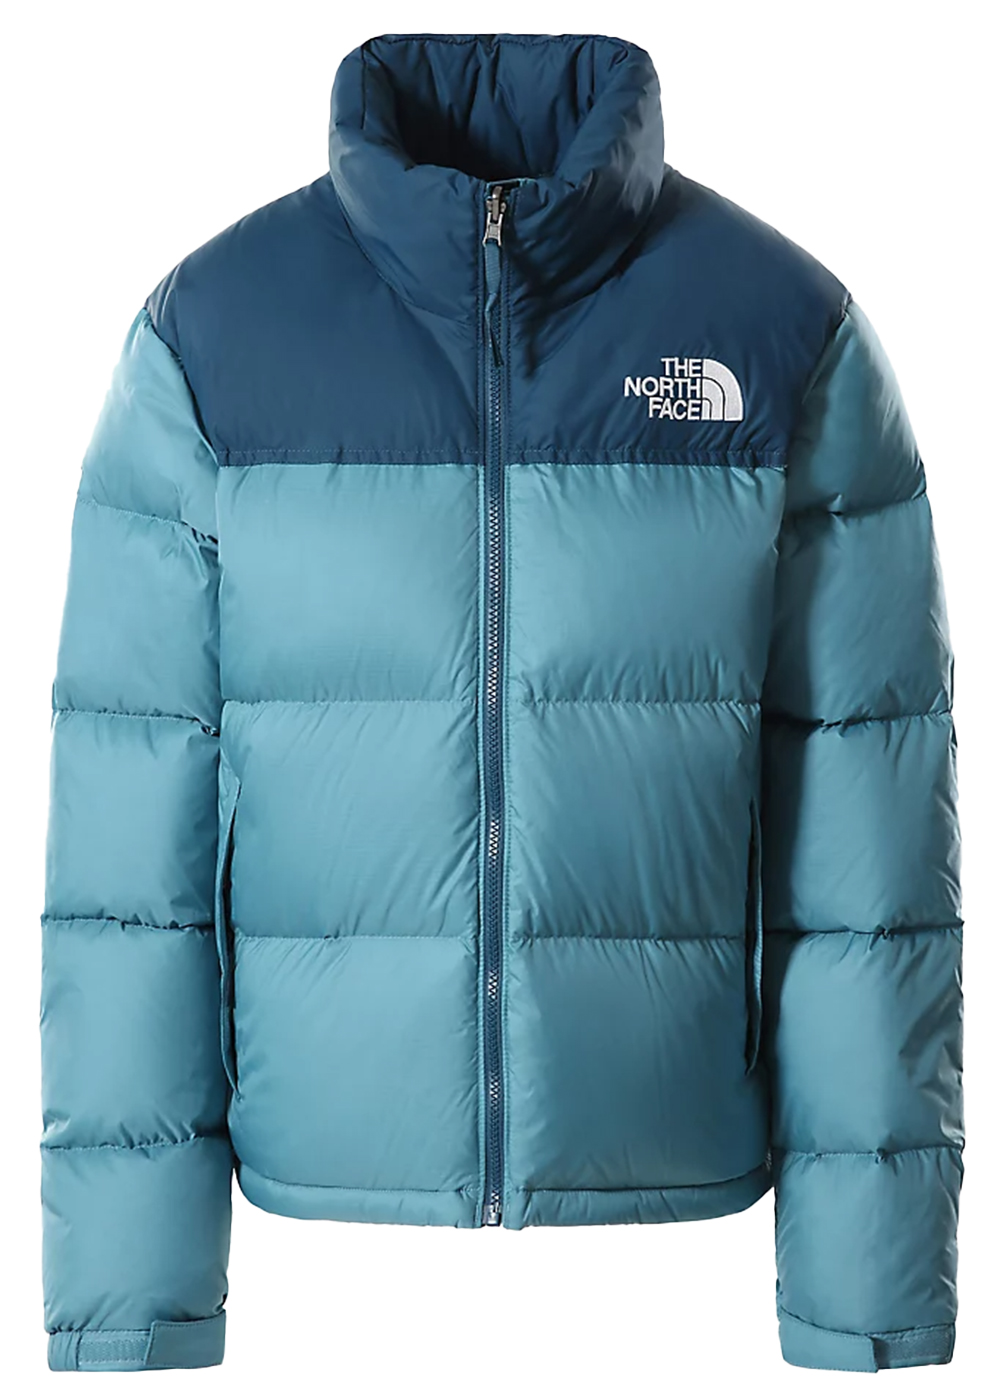 The North Face Womens 1996 Retro Nuptse 700 Fill Packable Jacket 